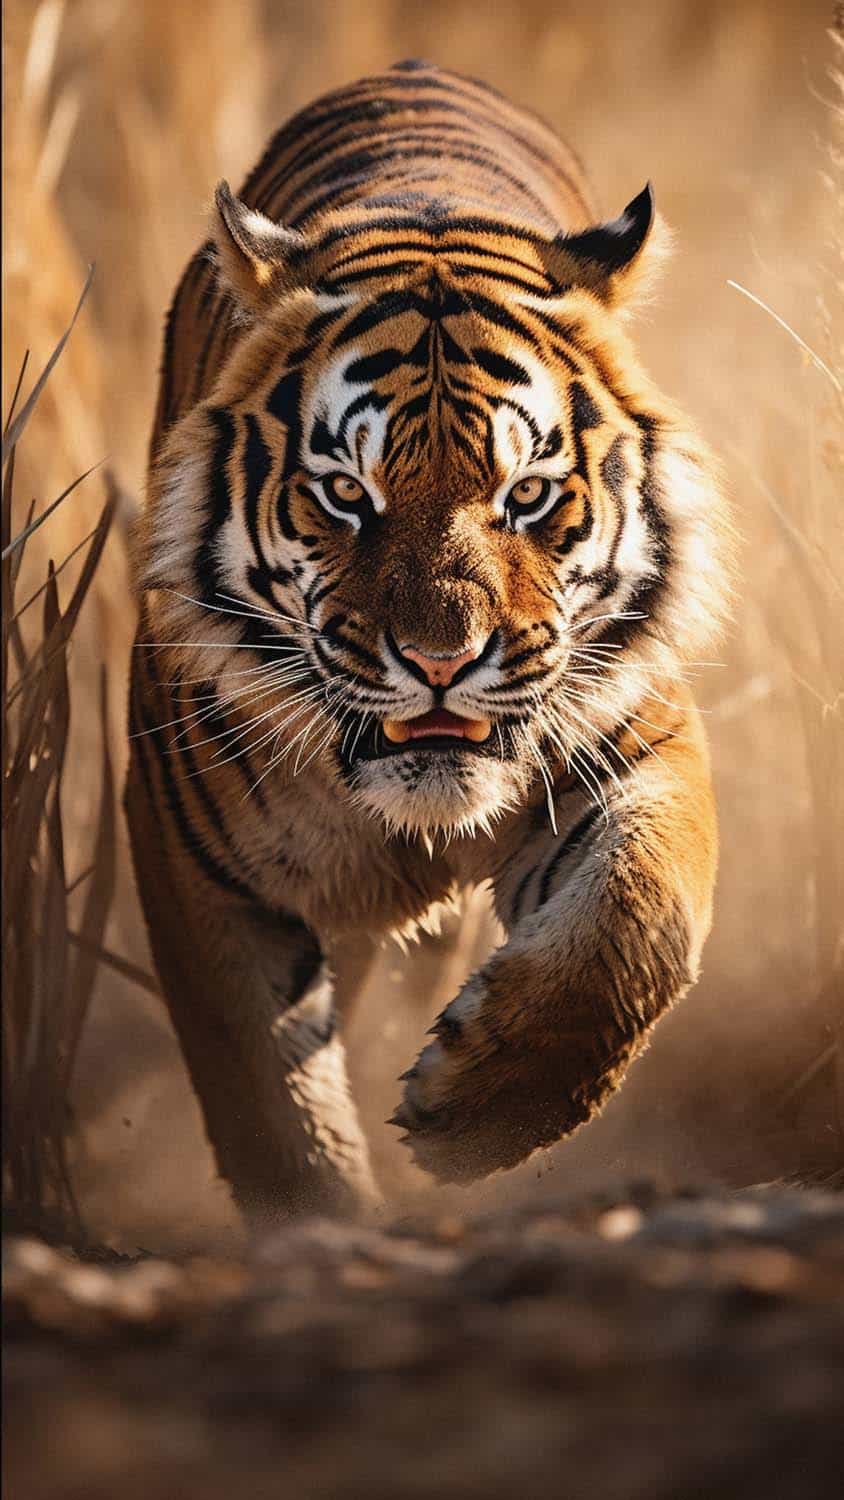 tiger 1080P 2k 4k HD wallpapers backgrounds free download  Rare Gallery